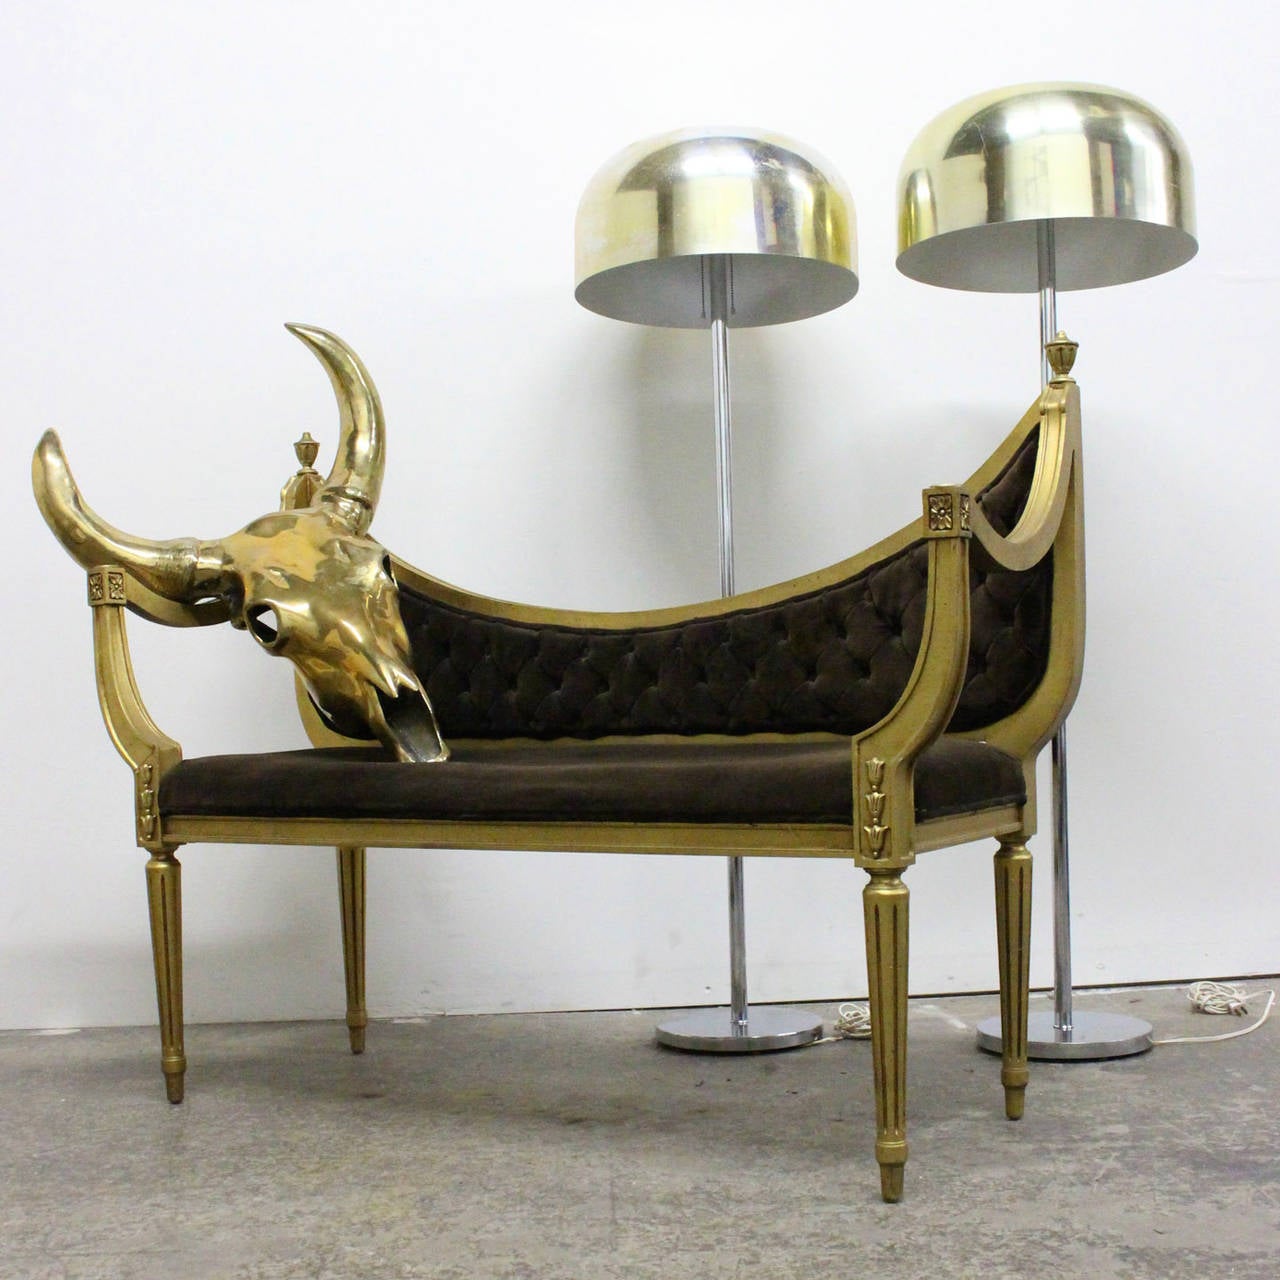 Monumental brass cow skull wall sculpture. Heavily weighted, circa 1970s.

Dimensions: 21